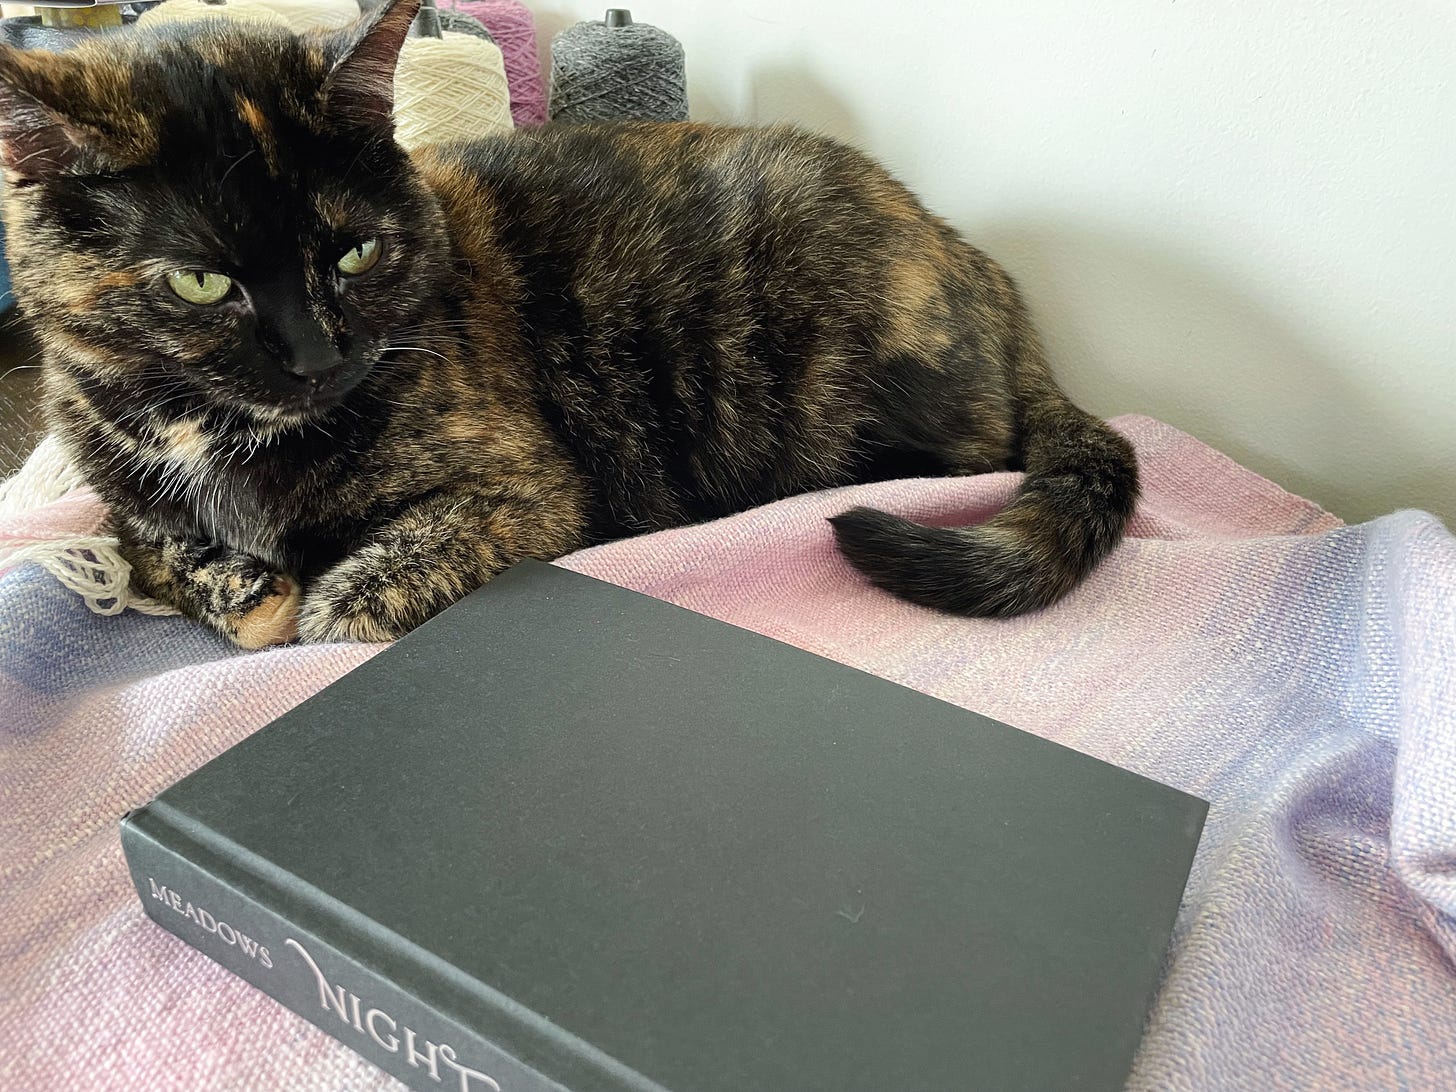 Tortie cat on a pastel woven cloth with a dark book